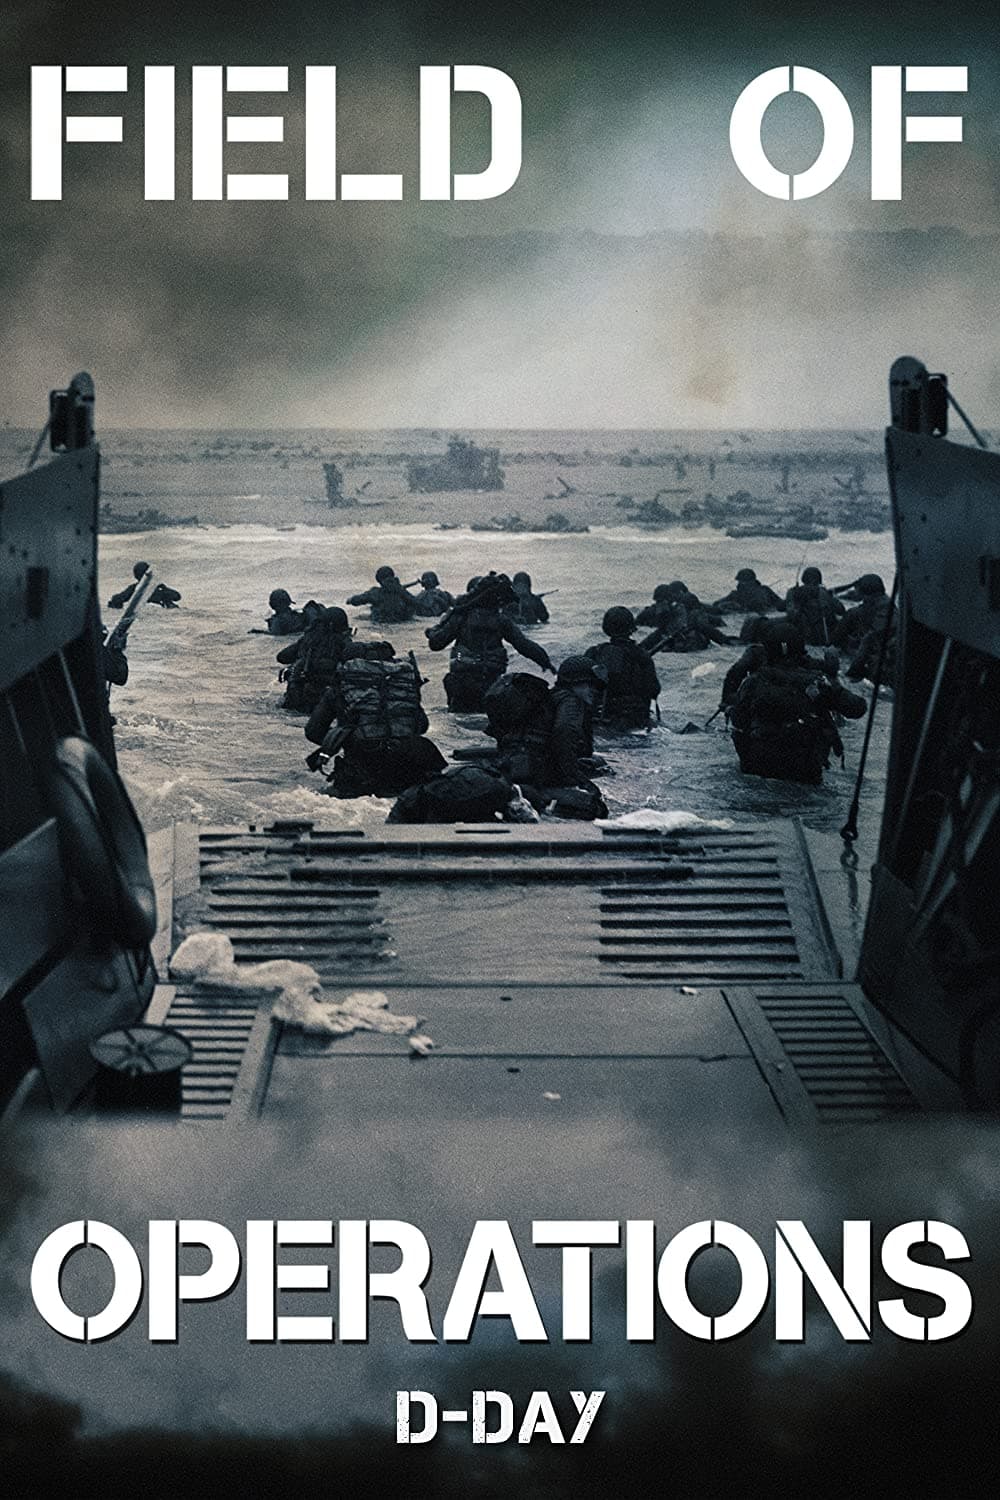 Field of Operations: D-Day on FREECABLE TV